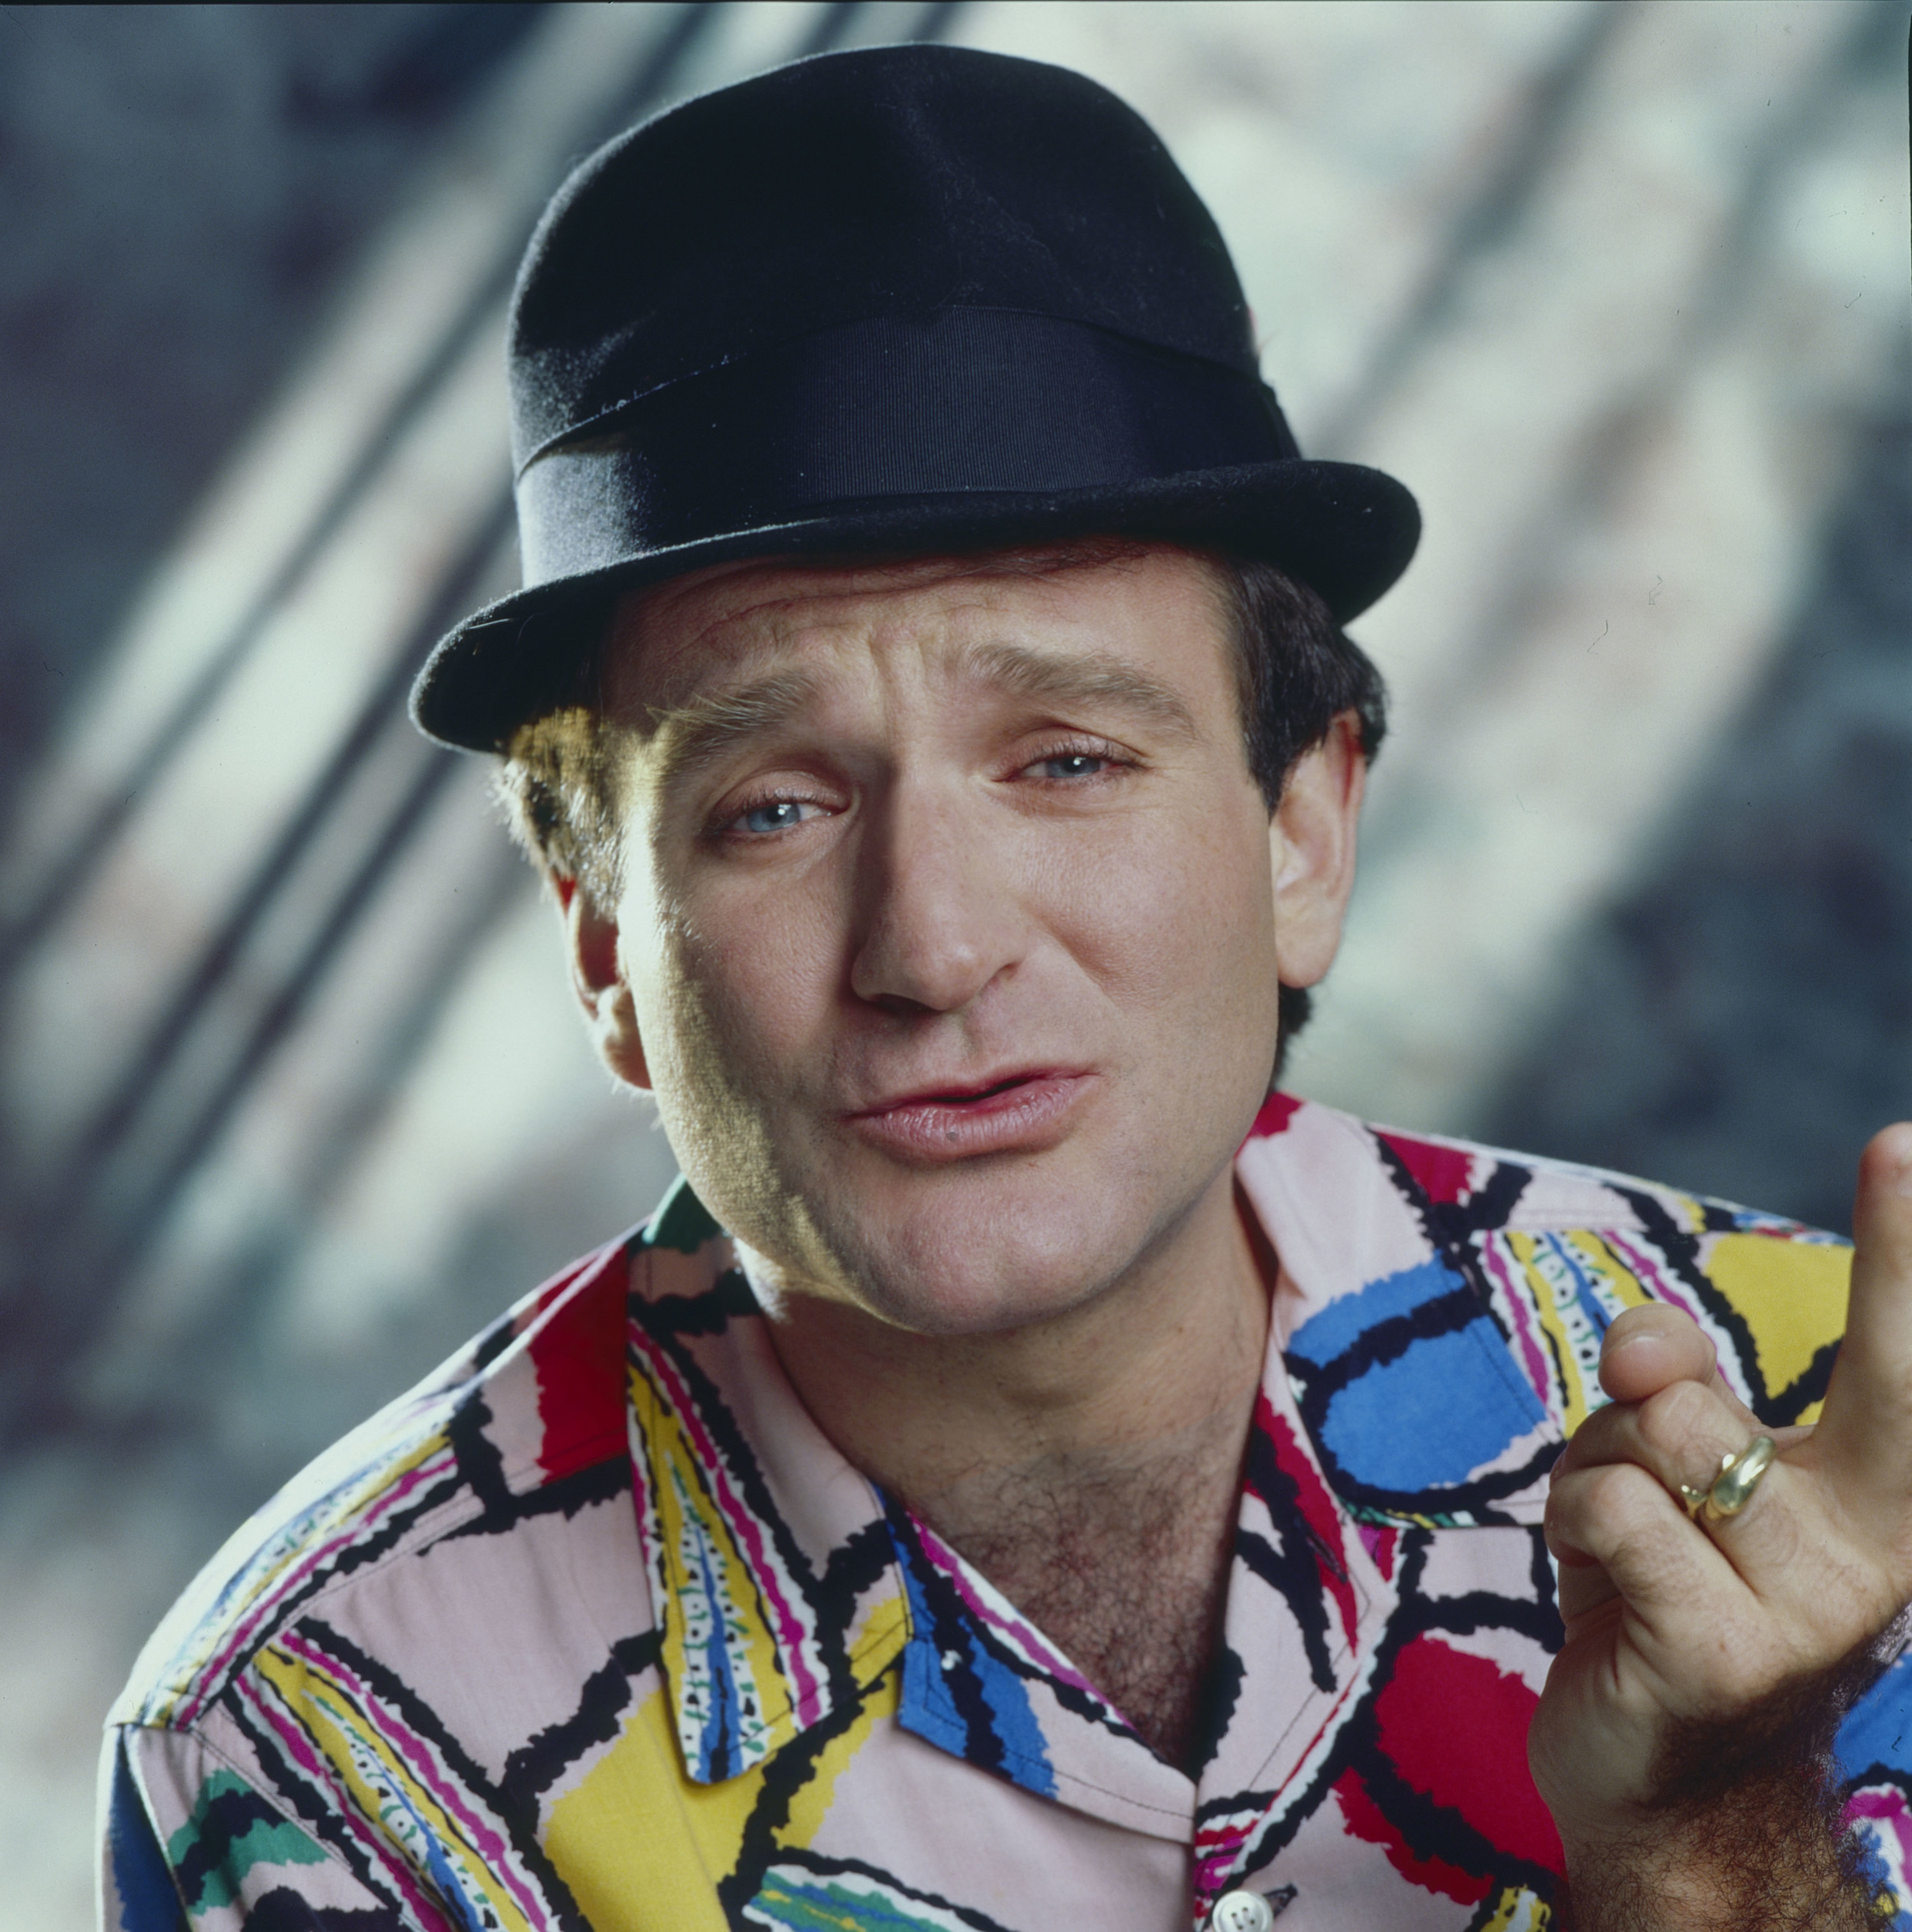 Robin Williams posts wearing a hate while holding up one hand and wearing a pattern shirt